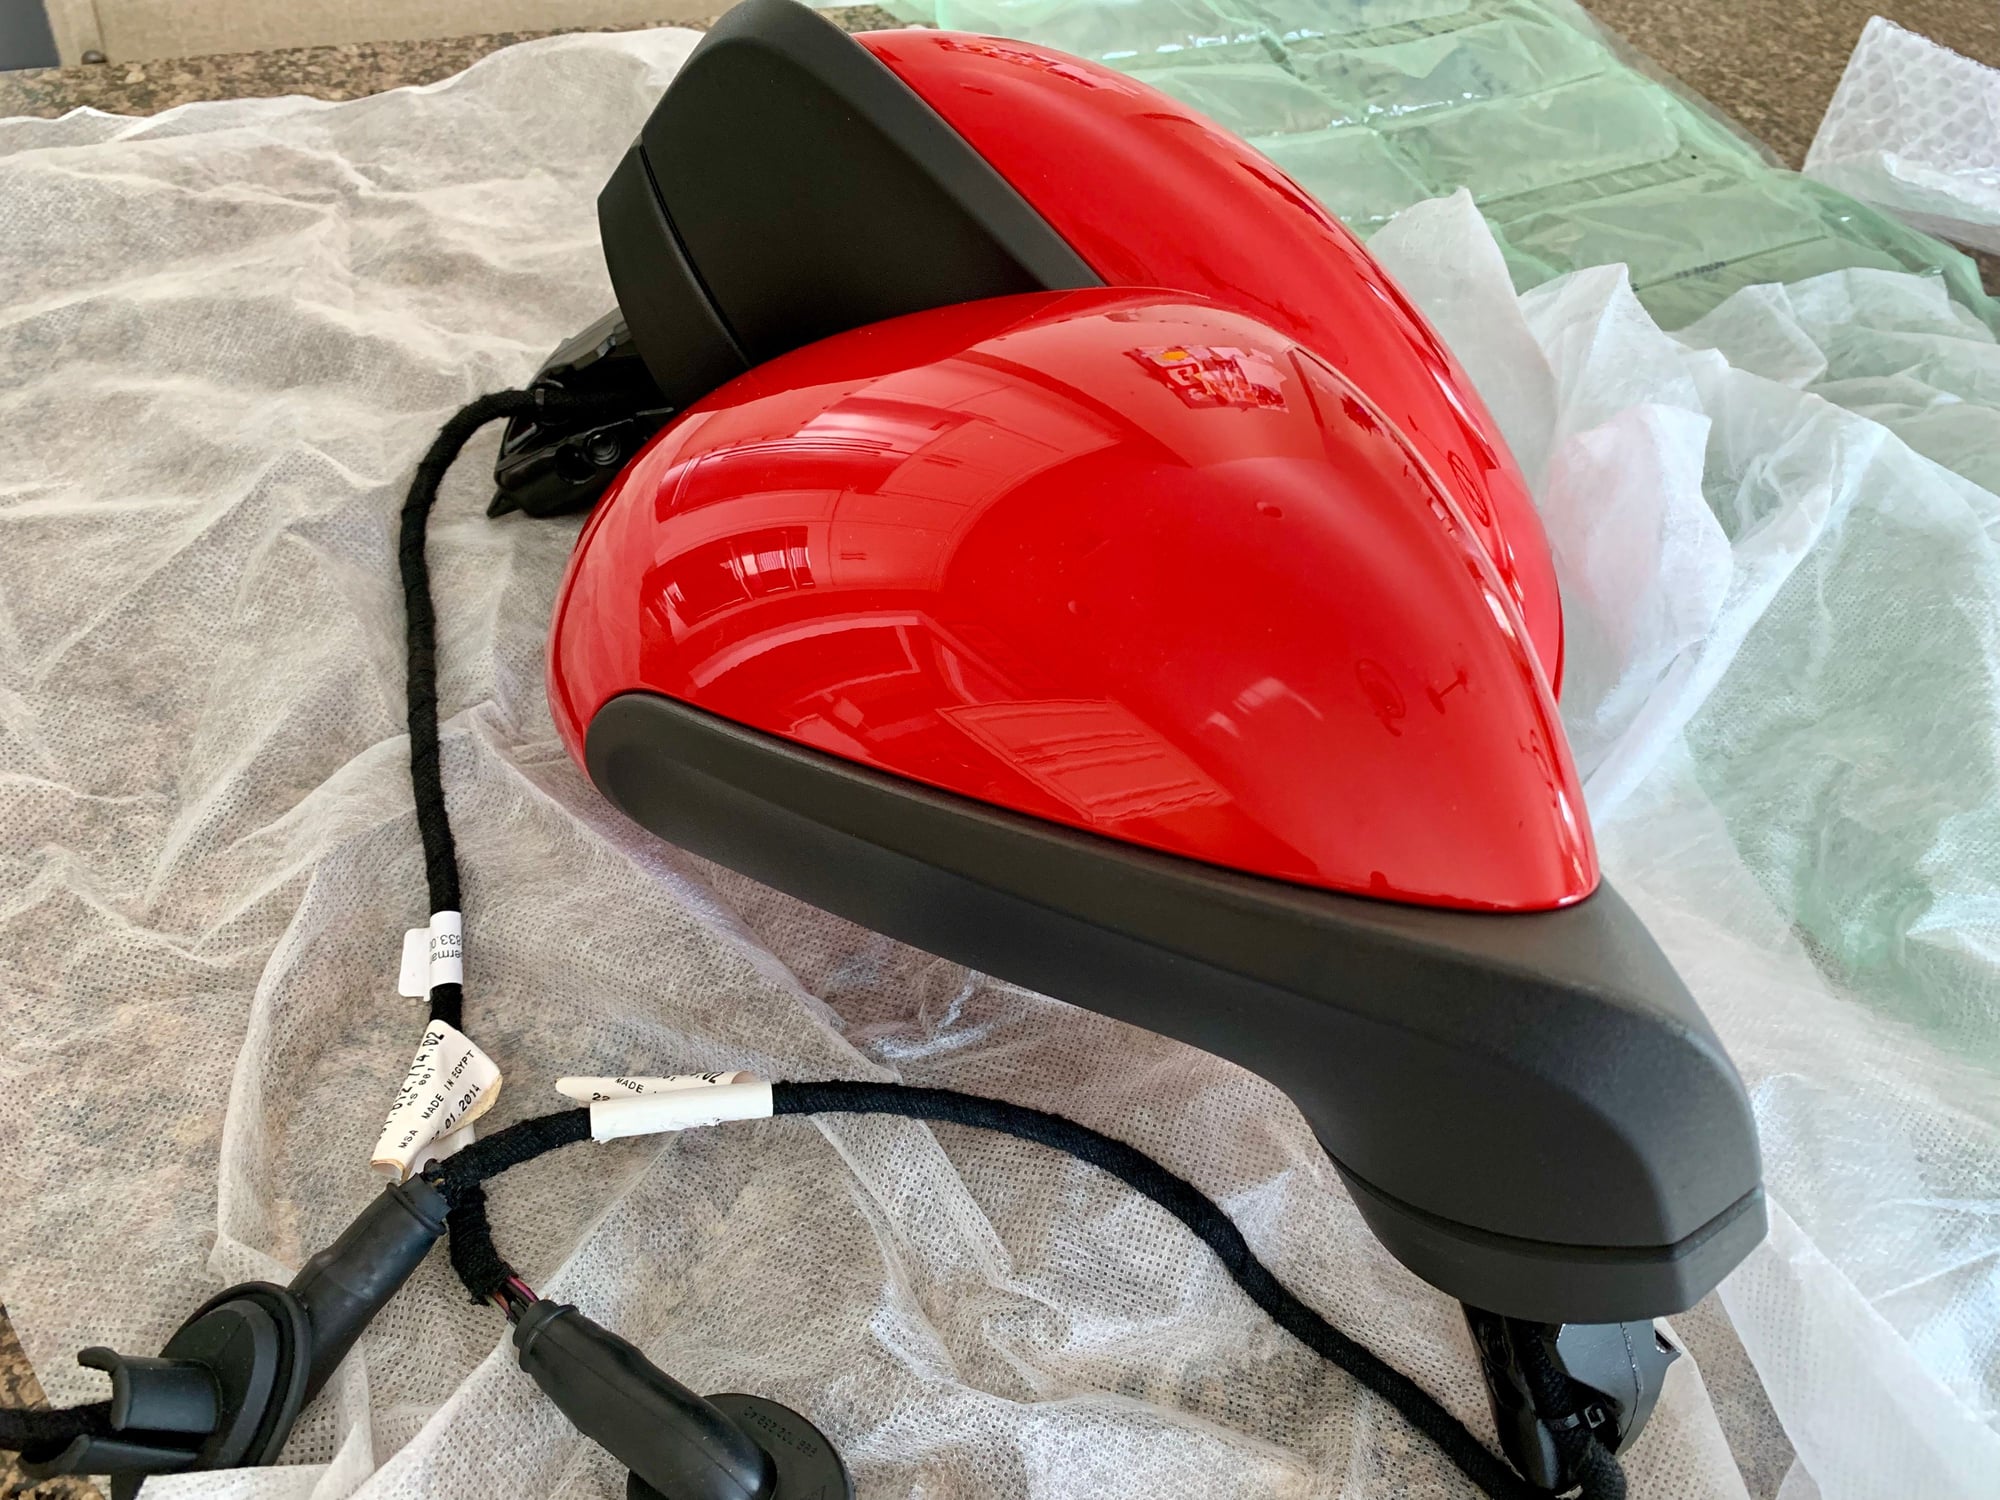 Exterior Body Parts - FS: 991/981 Guards Red mirrors. Power, heated, auto dim, memory. - Used - 2012 to 2016 Porsche 911 - 2013 to 2016 Porsche Boxster - 2013 to 2016 Porsche Cayman - Lansdale, PA 19446, United States